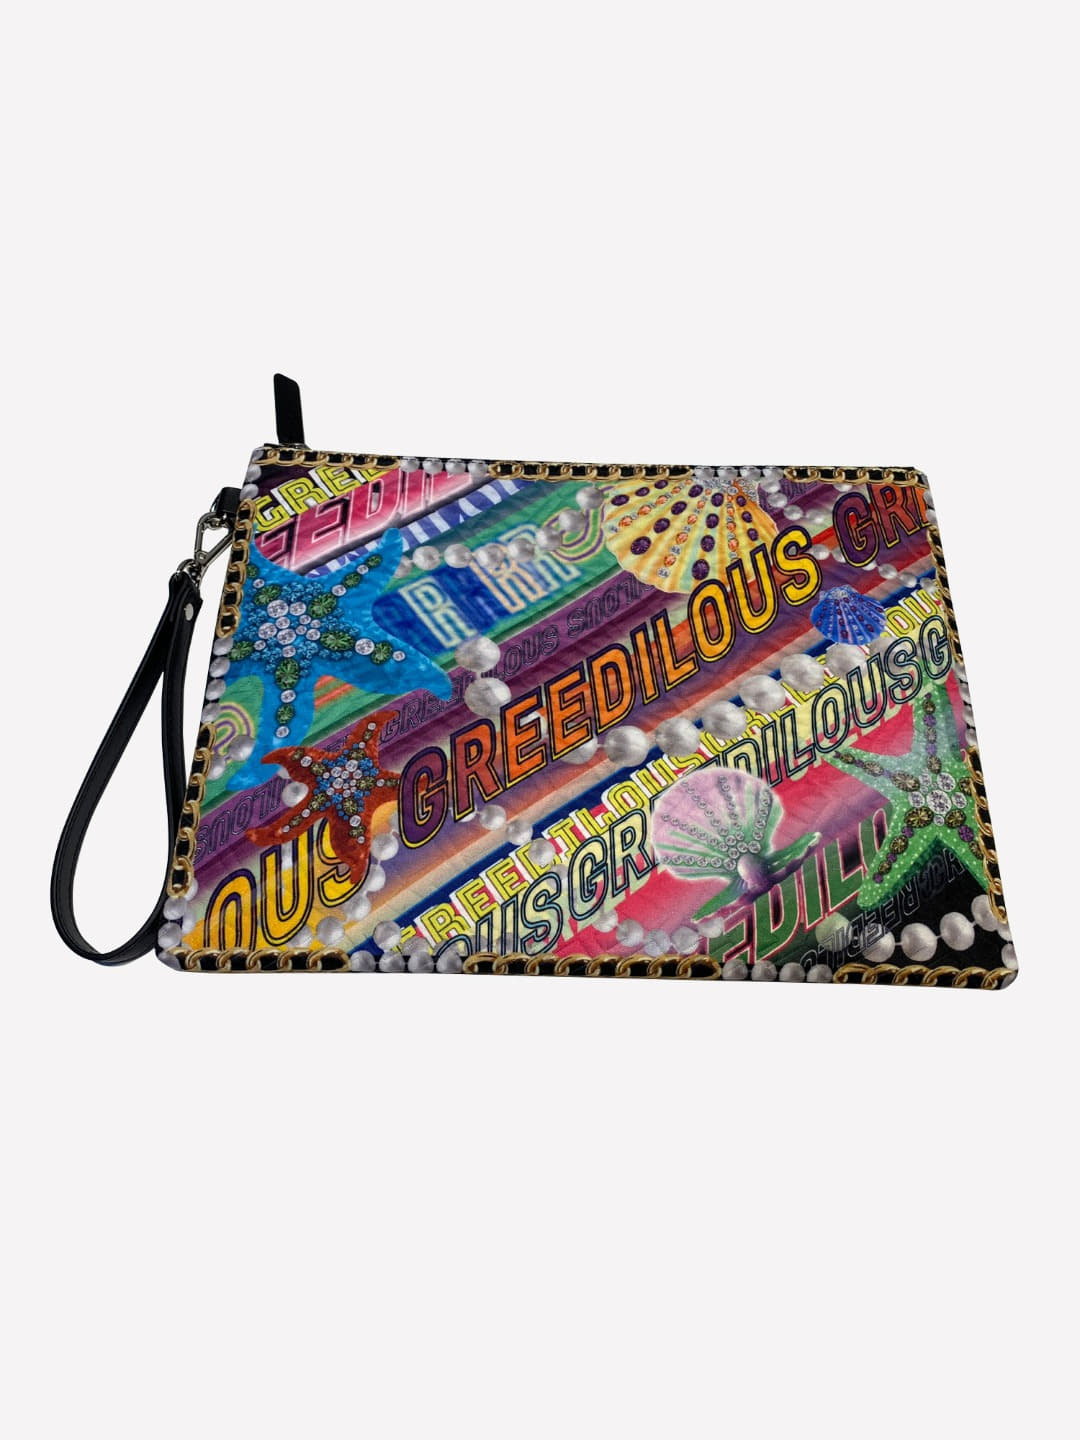 NEONSIGN ONE-POINT PRINT CLUTCH